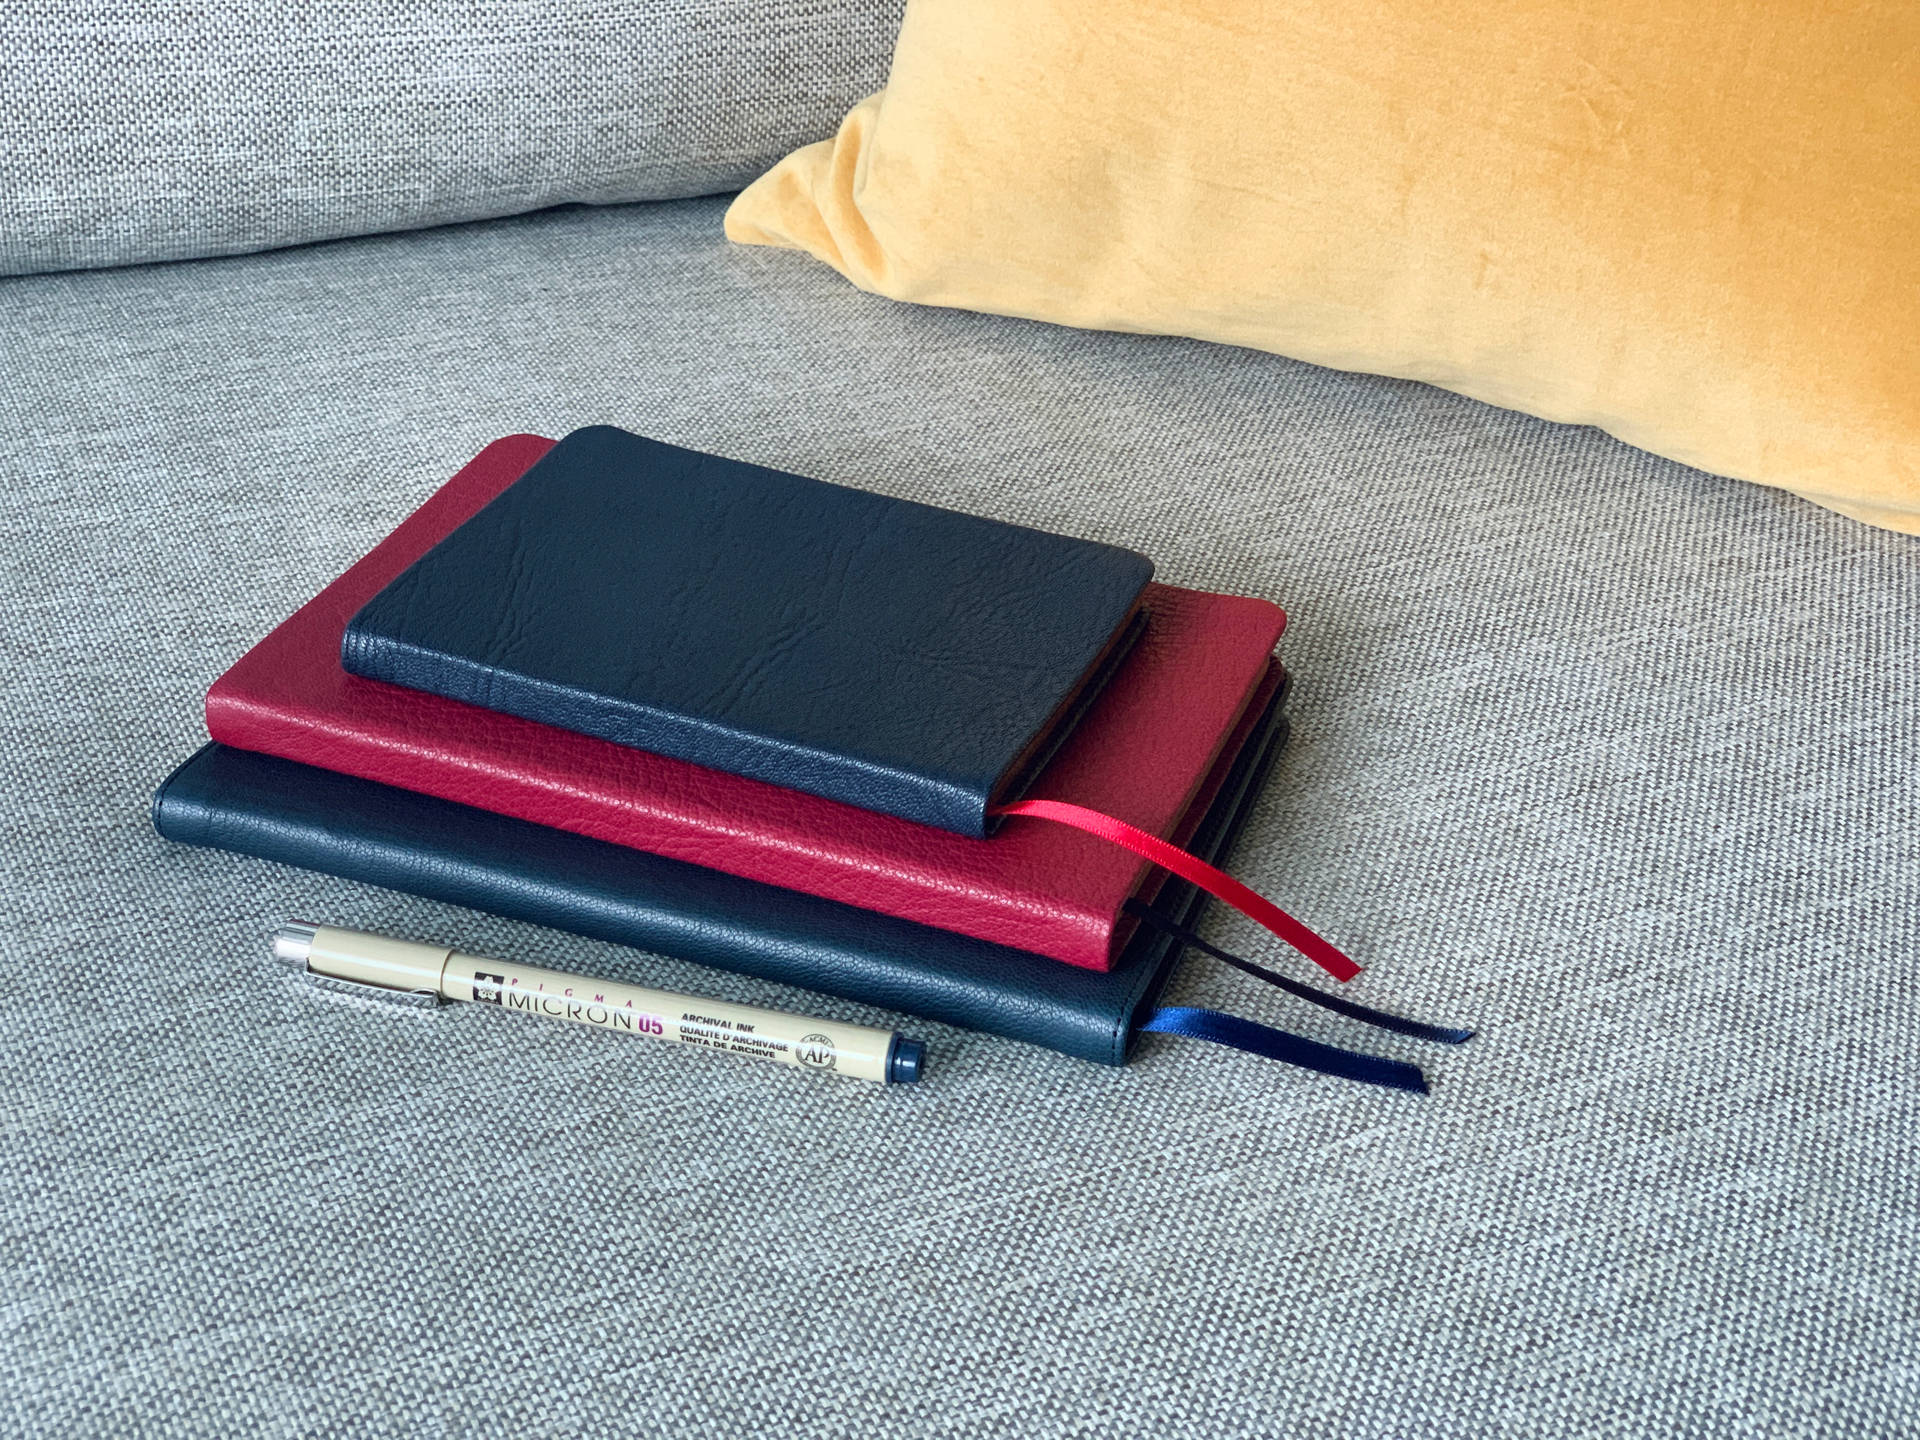 Journals With Red And Black Covers